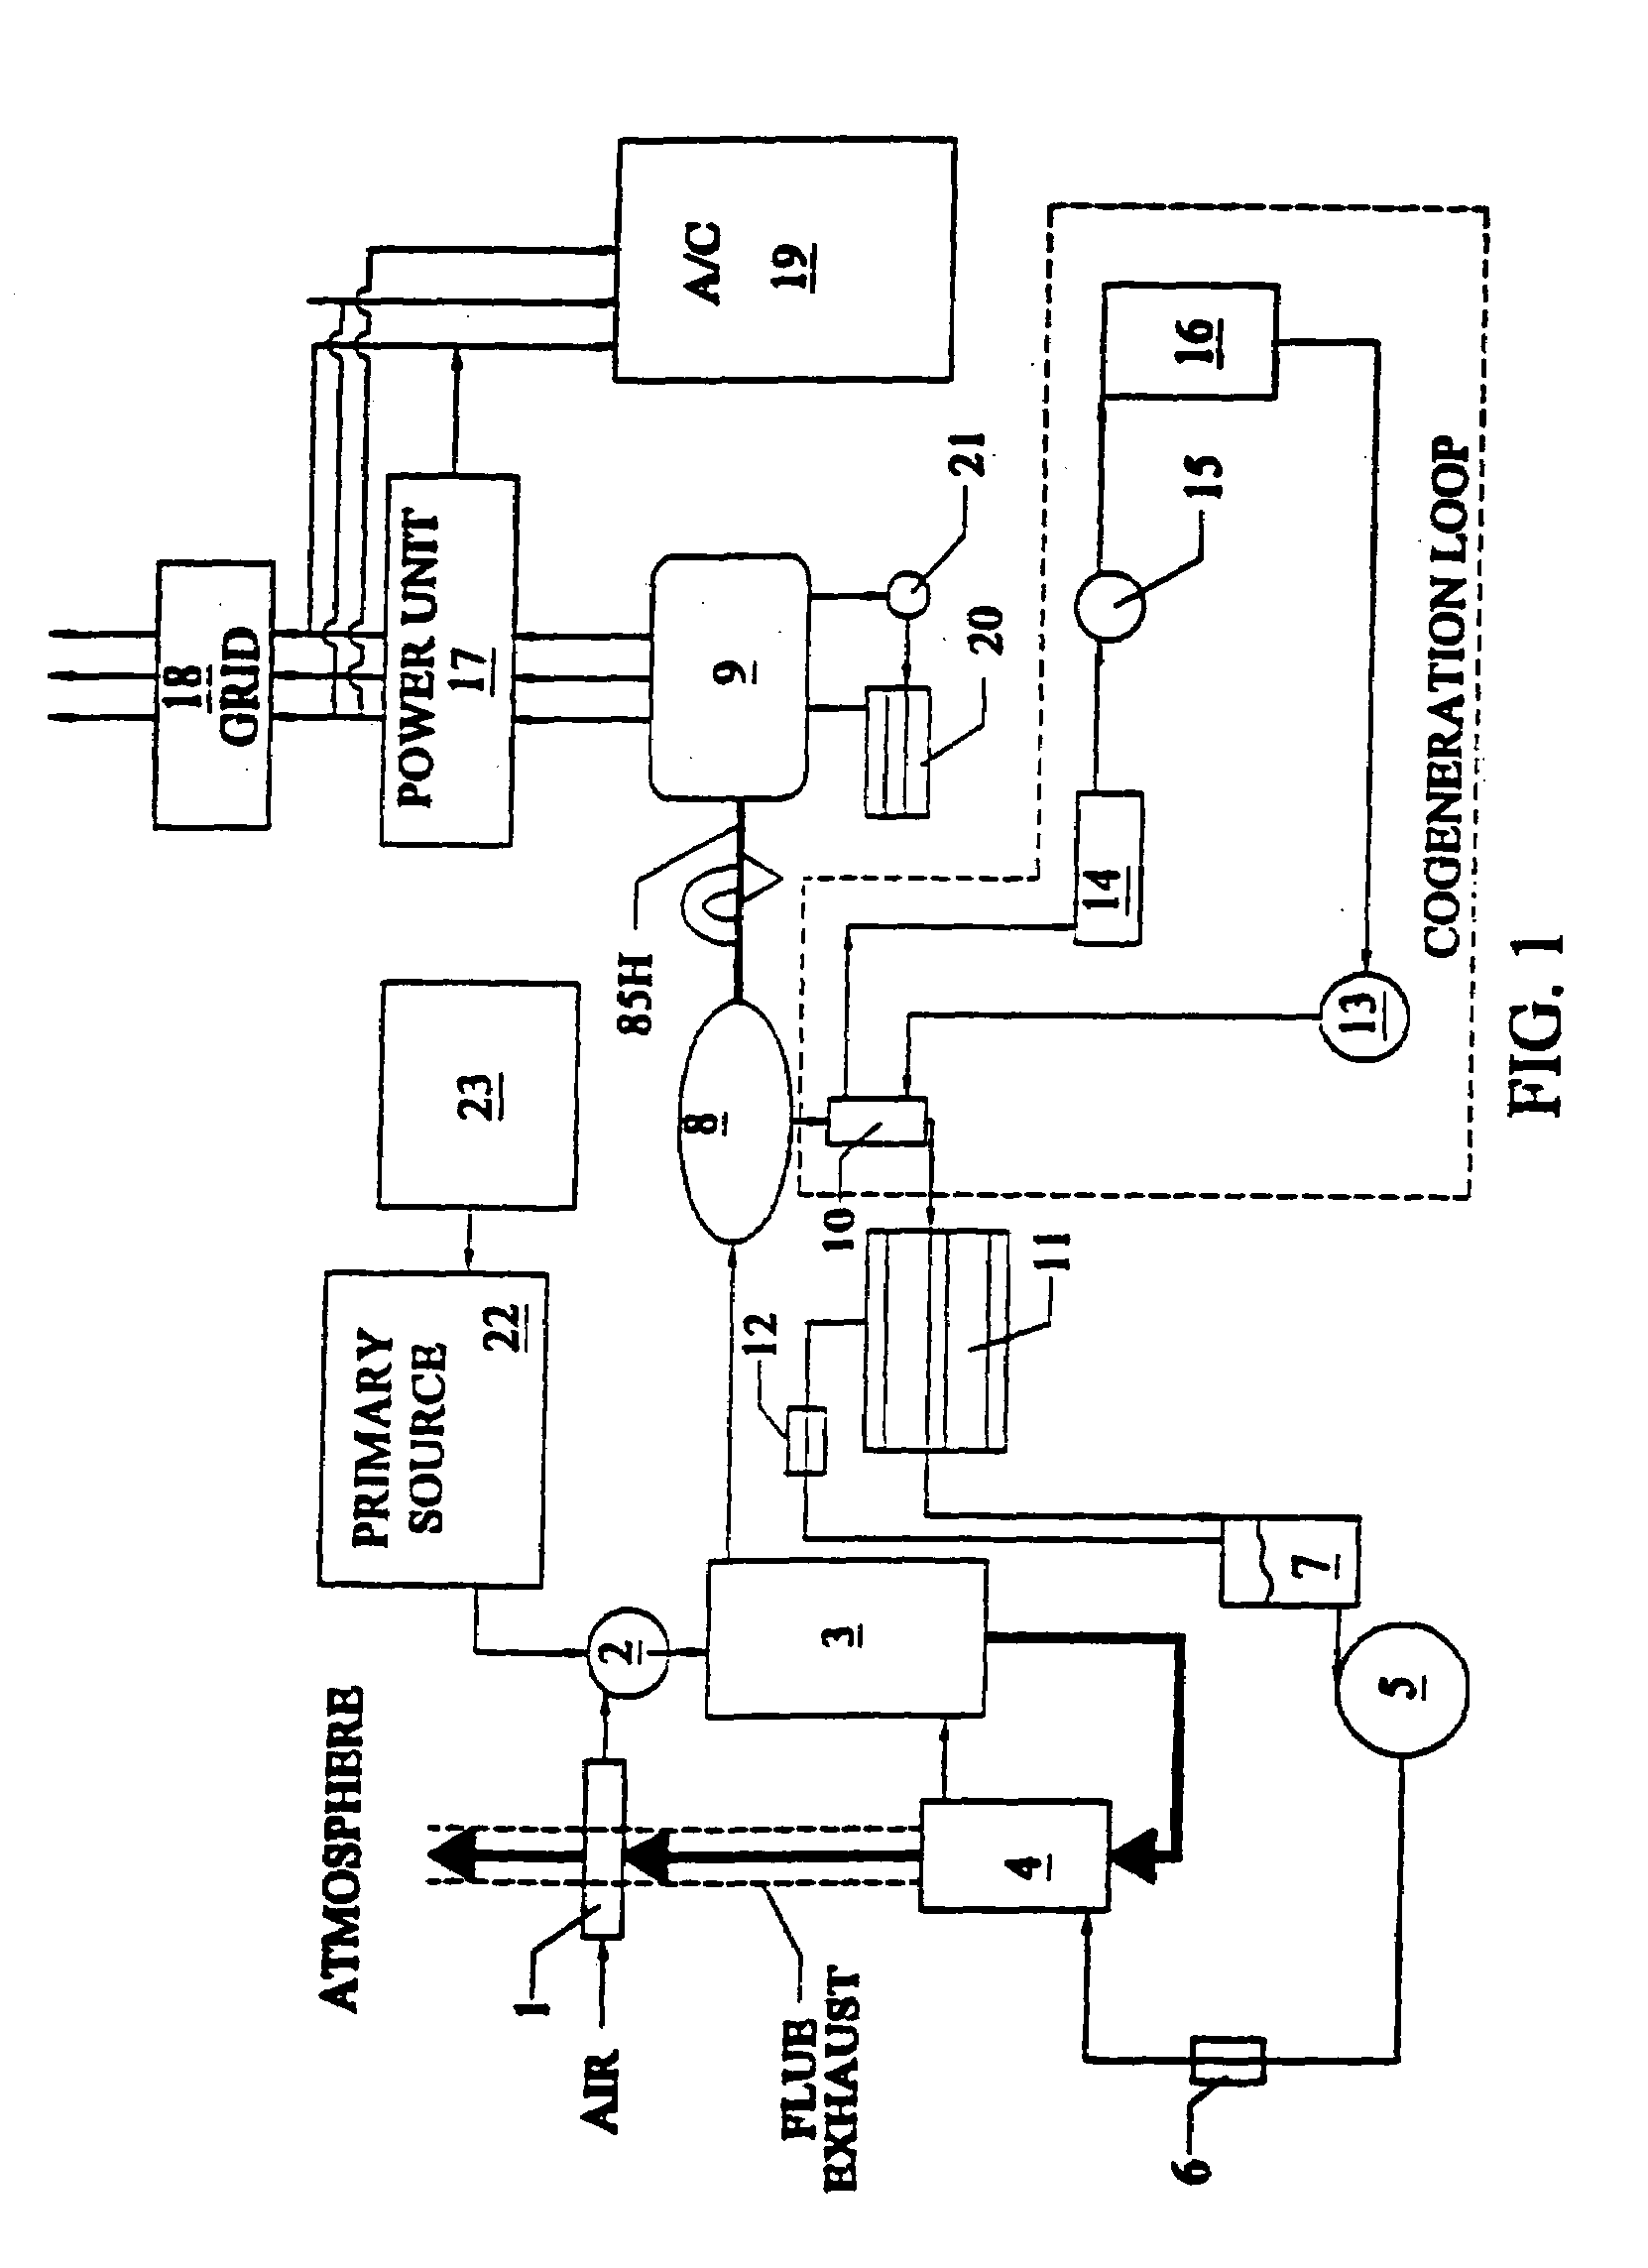 Power generation methods and systems